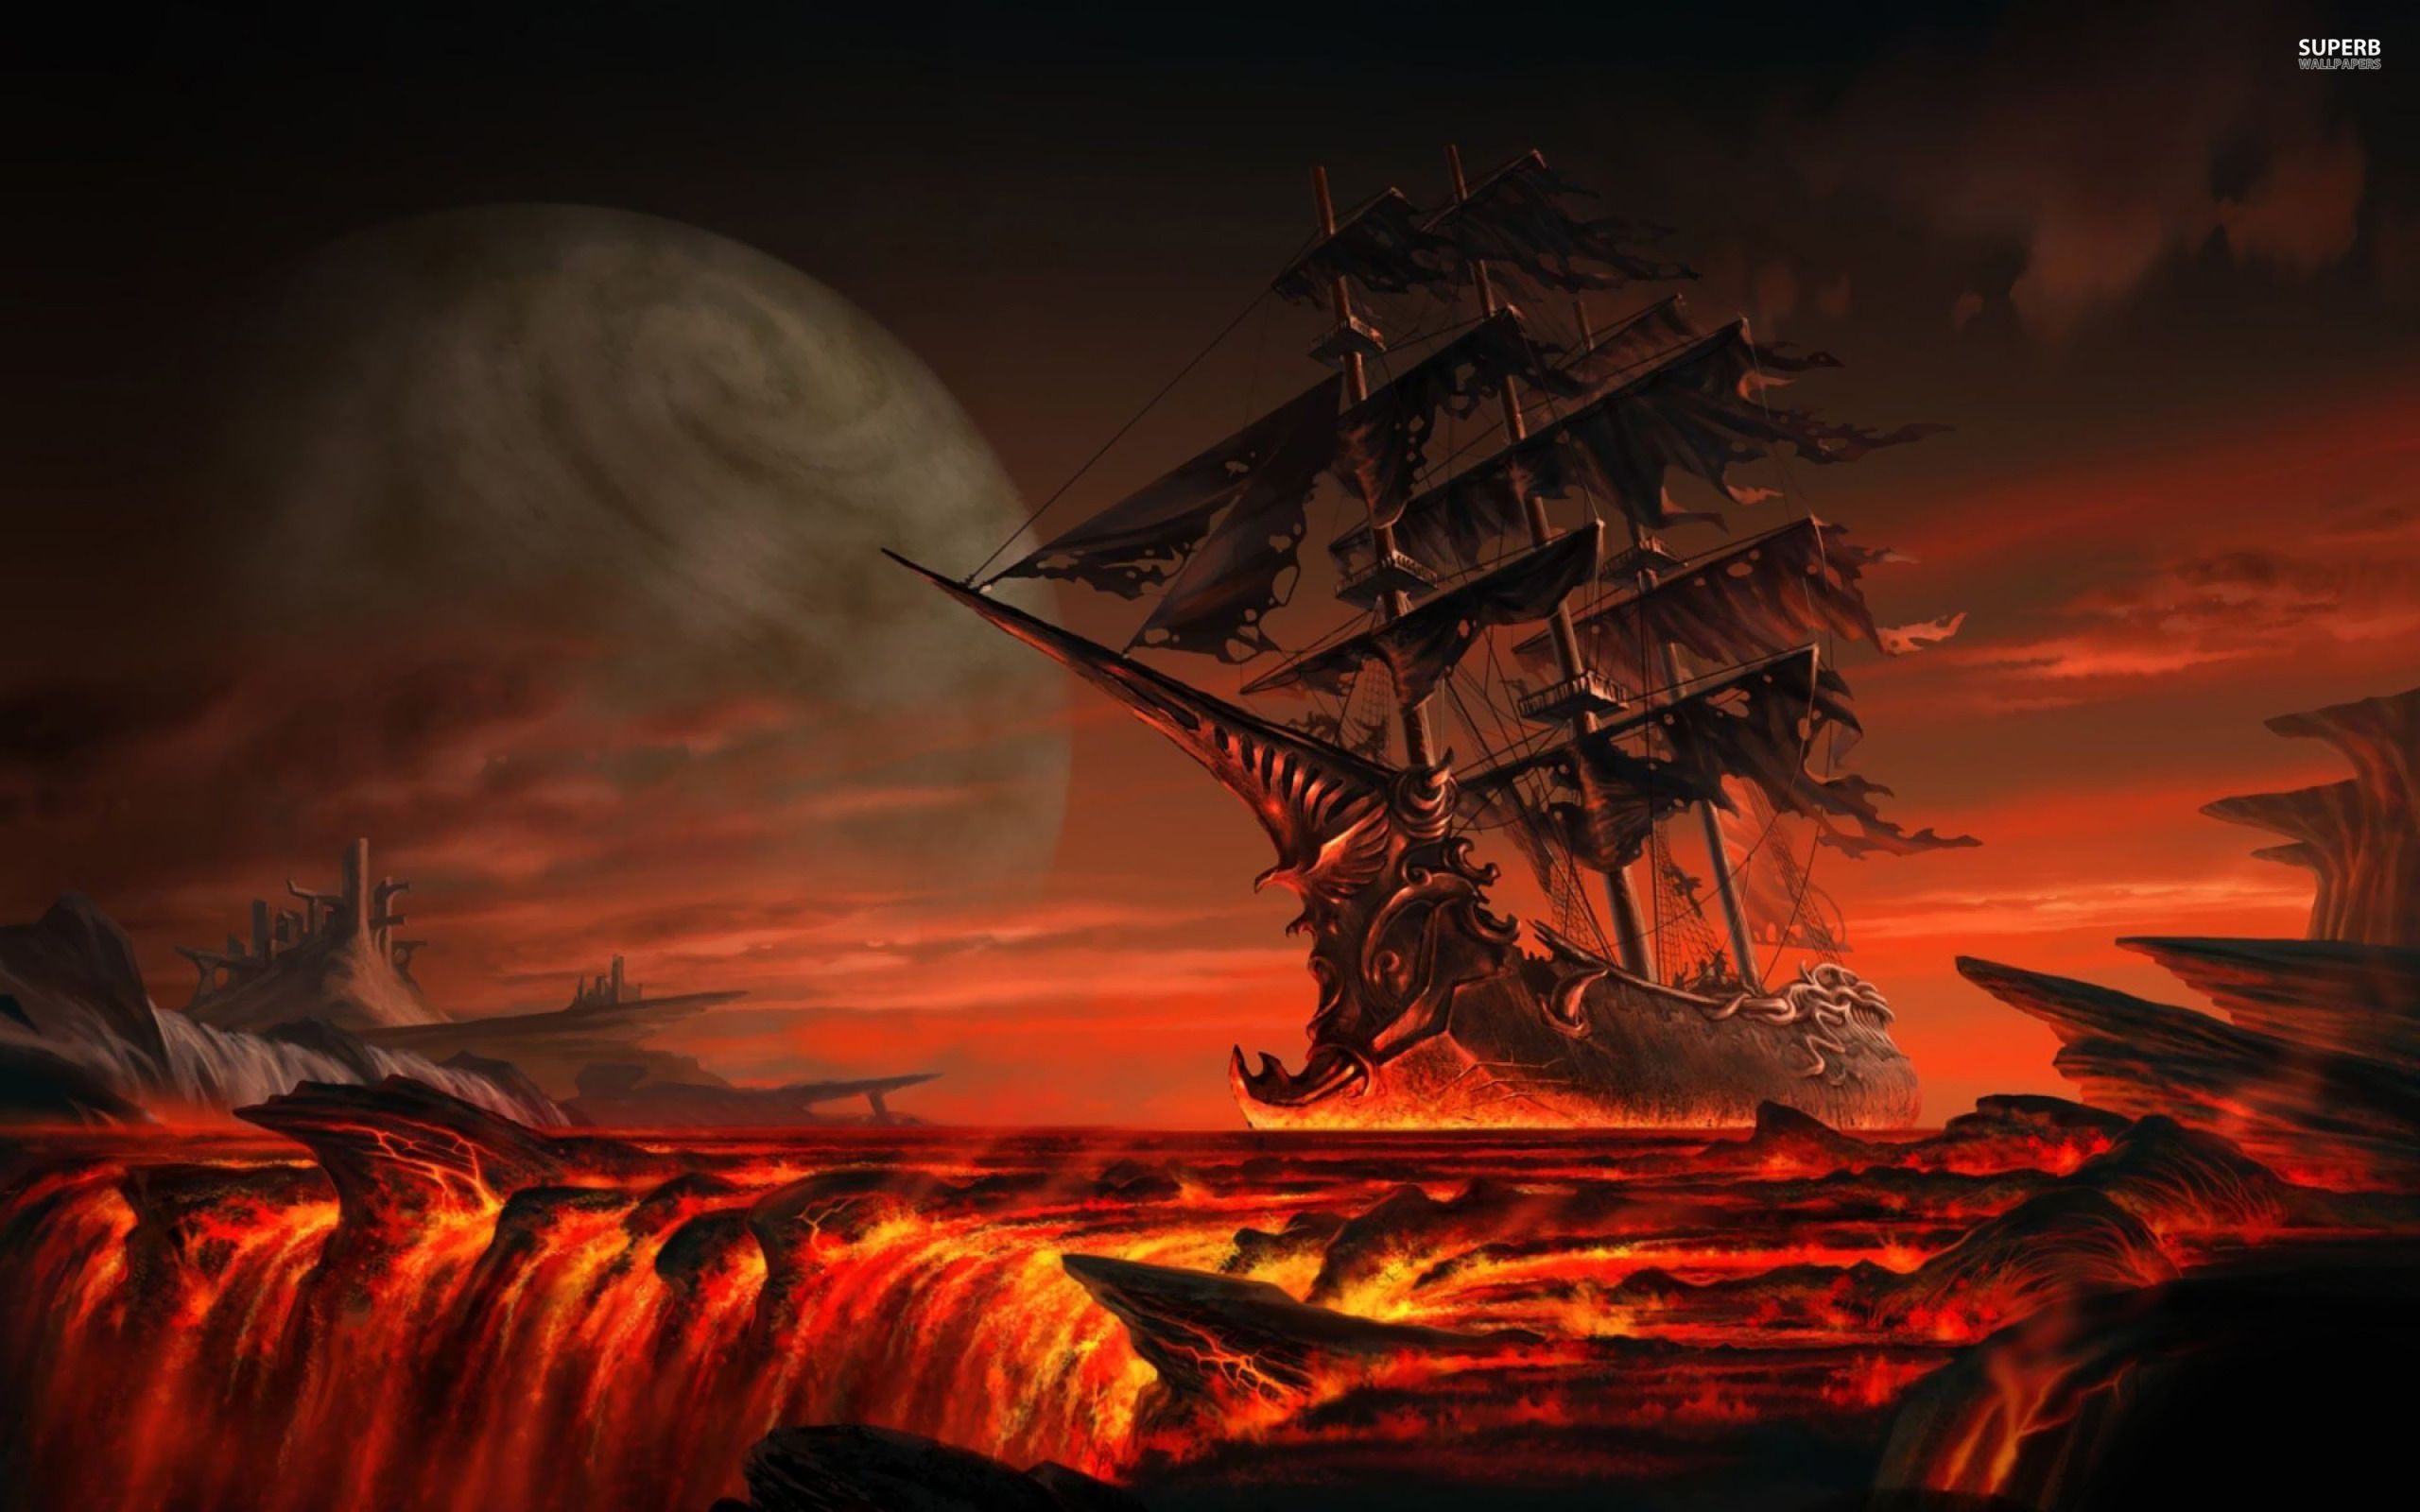 Ghost ship floating on lava wallpaper - Fantasy wallpapers - #22554